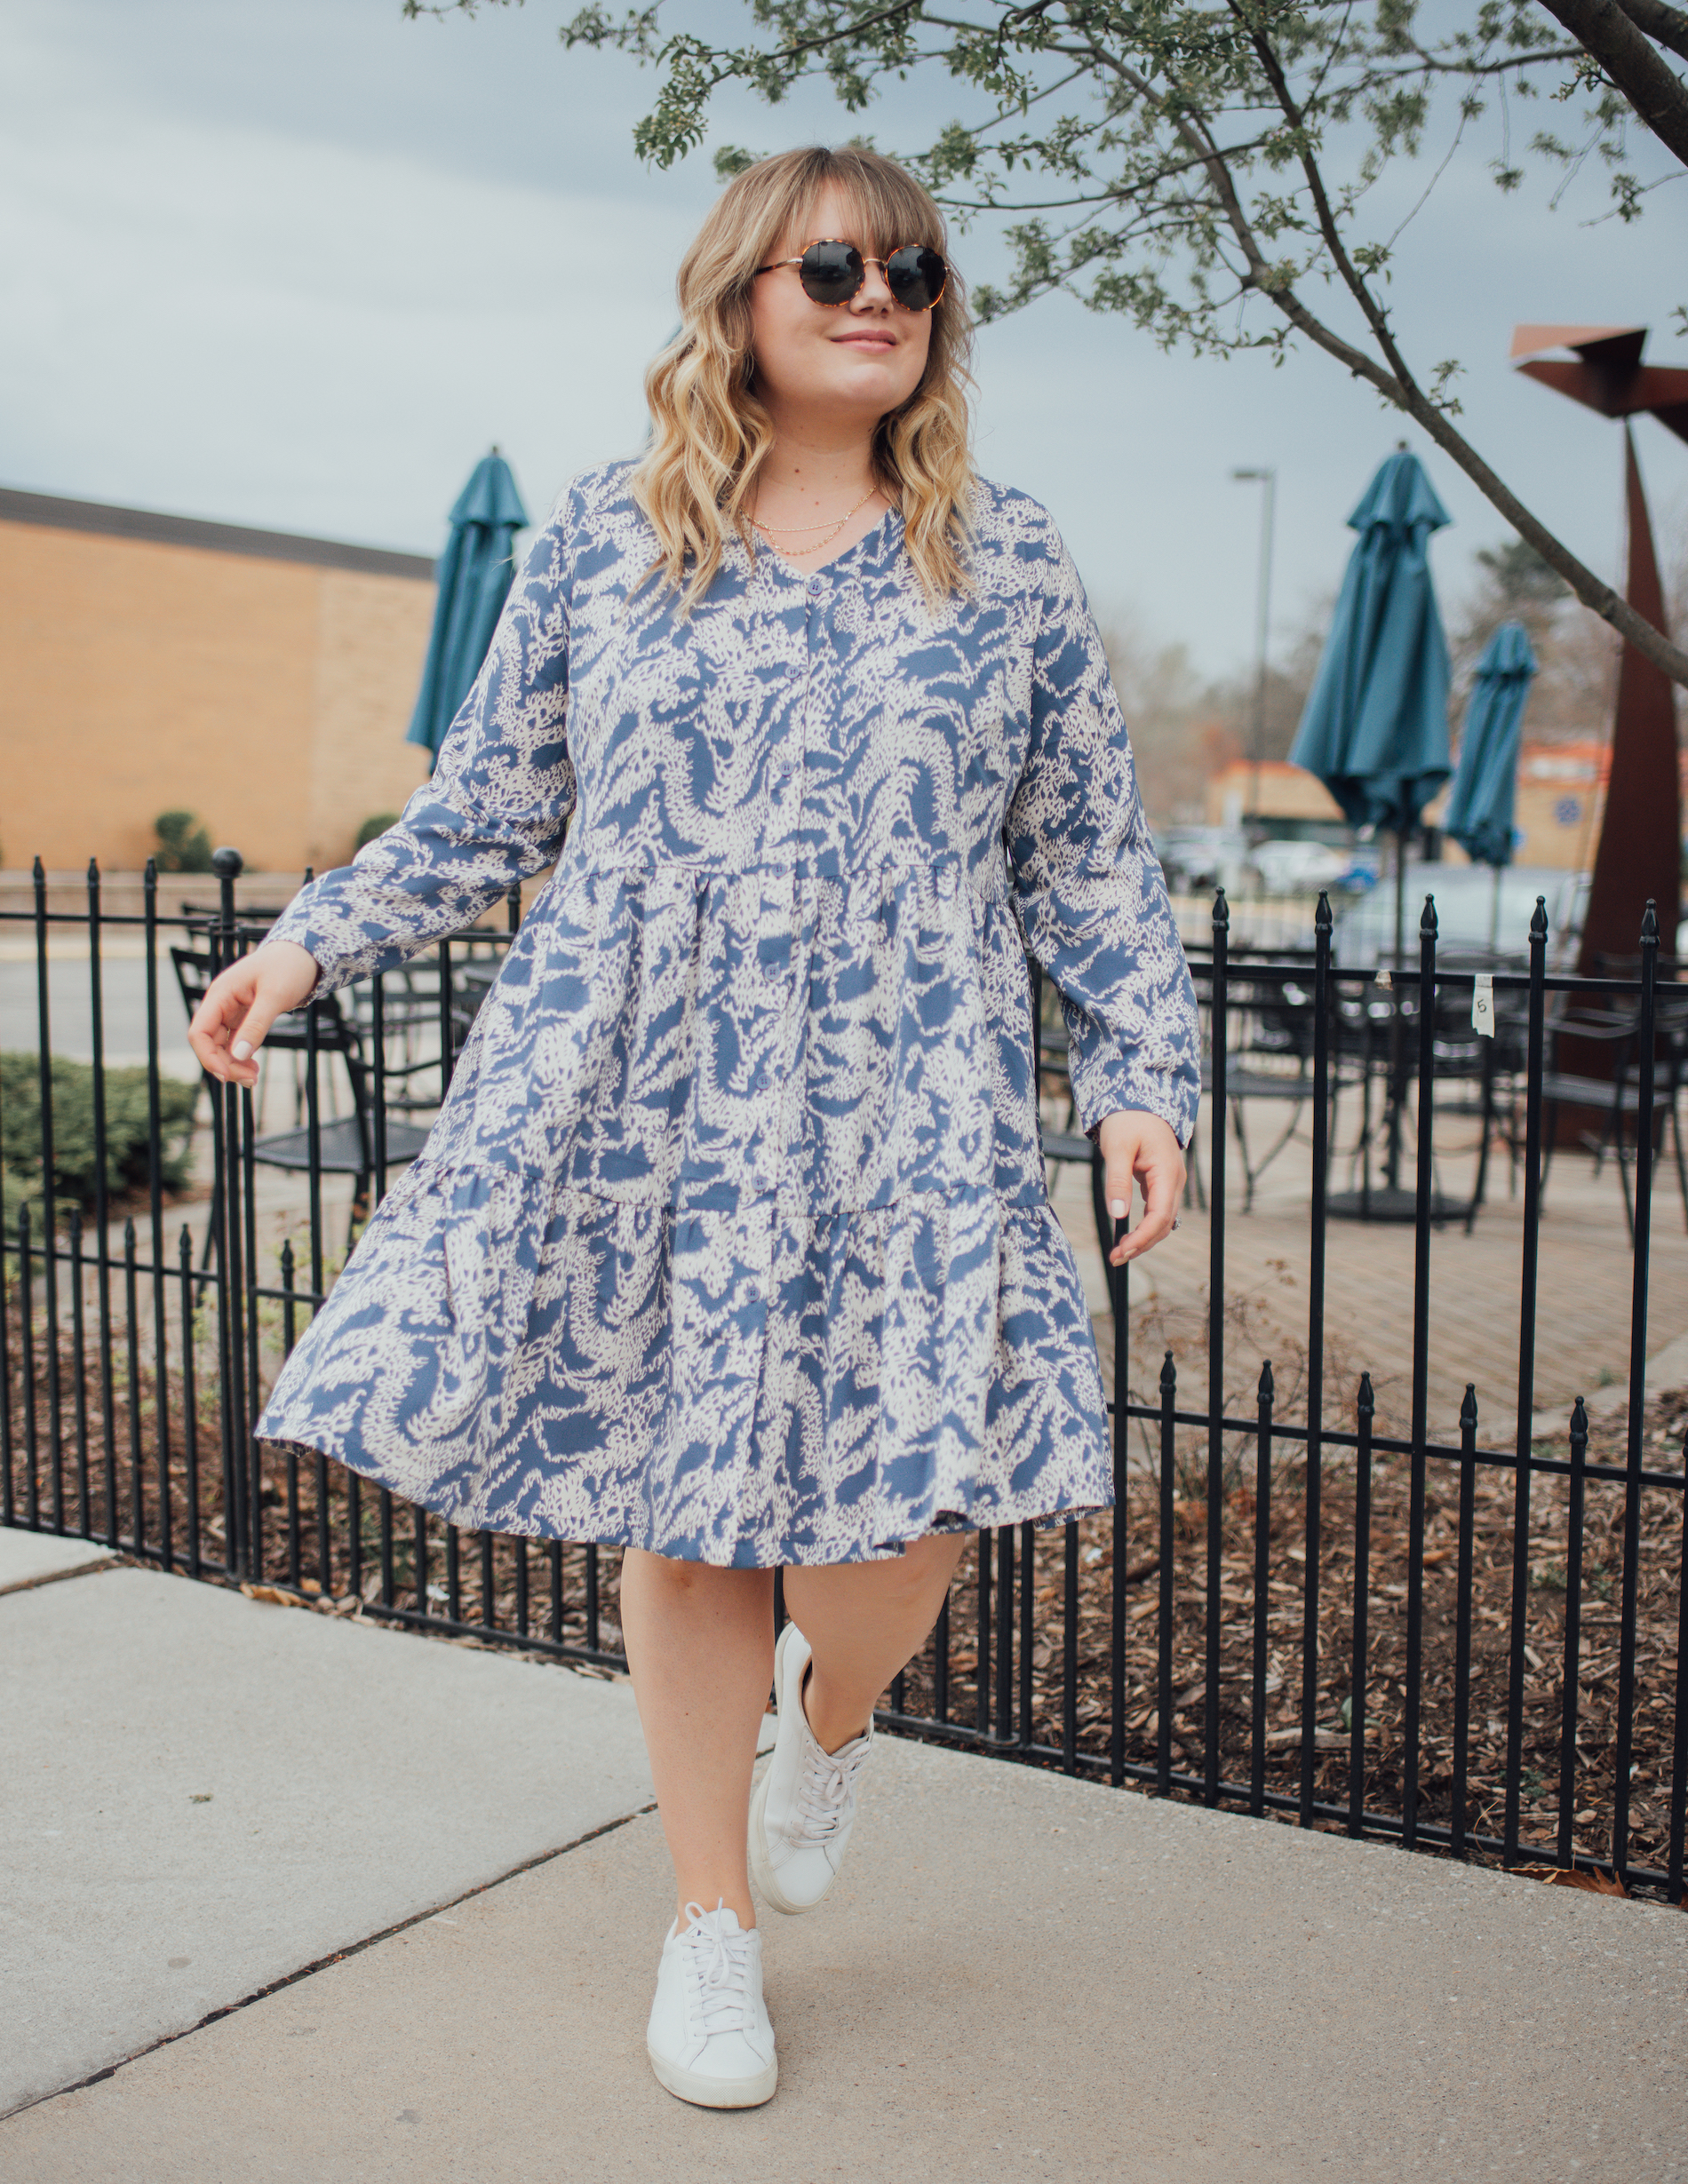 Spring Swing Dress To Love. Sharing some spring and summer swing dresses! A swing dress has with waist that flows away from the body